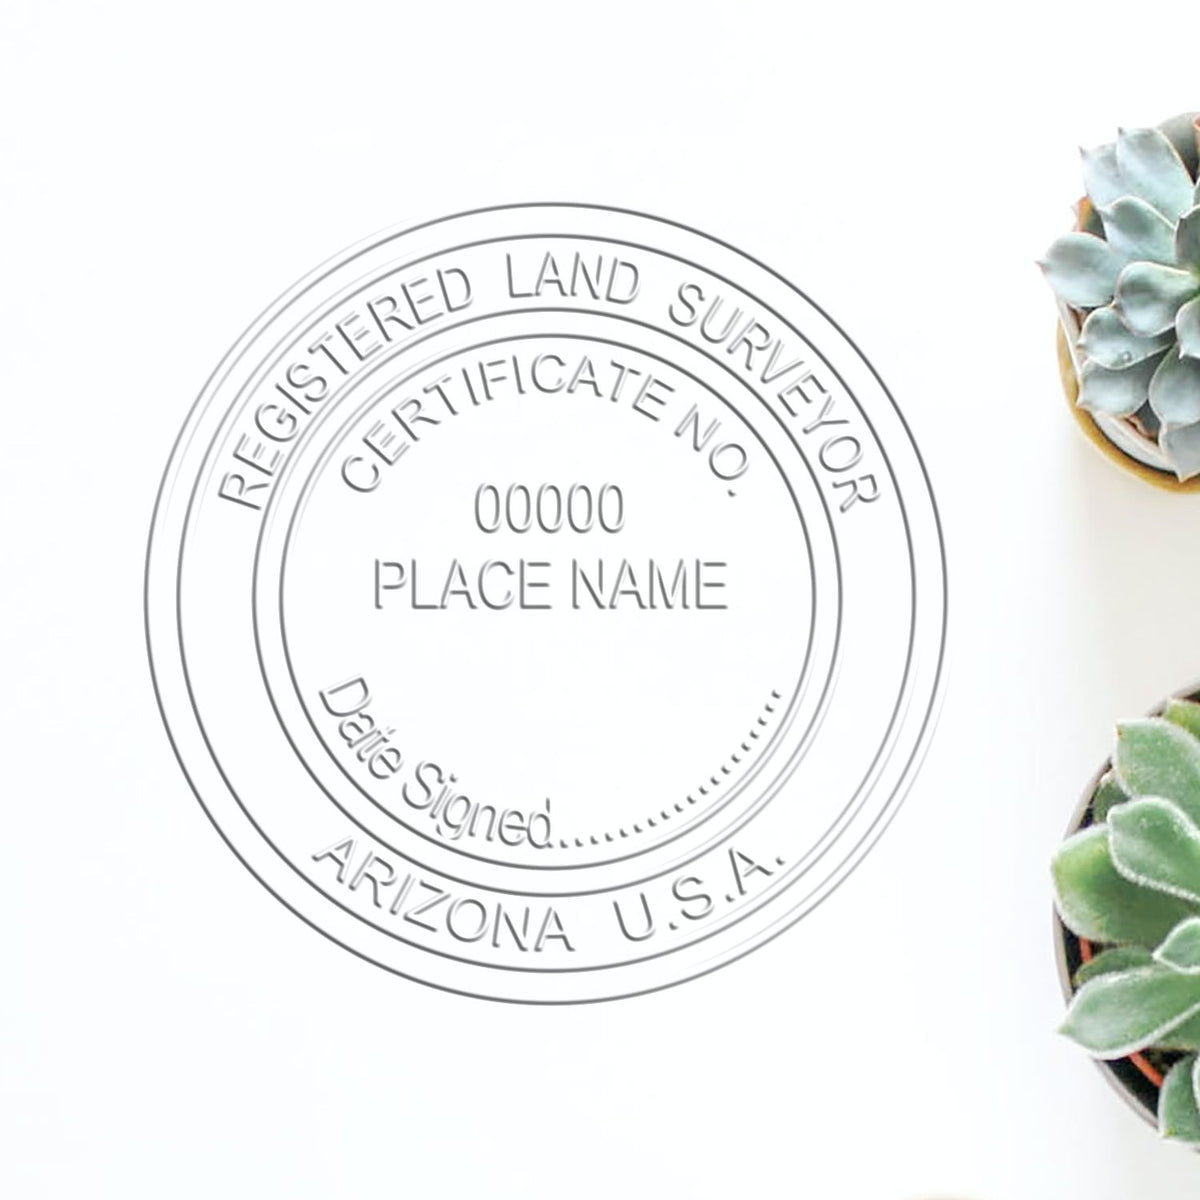 A stamped impression of the Long Reach Arizona Land Surveyor Seal in this stylish lifestyle photo, setting the tone for a unique and personalized product.